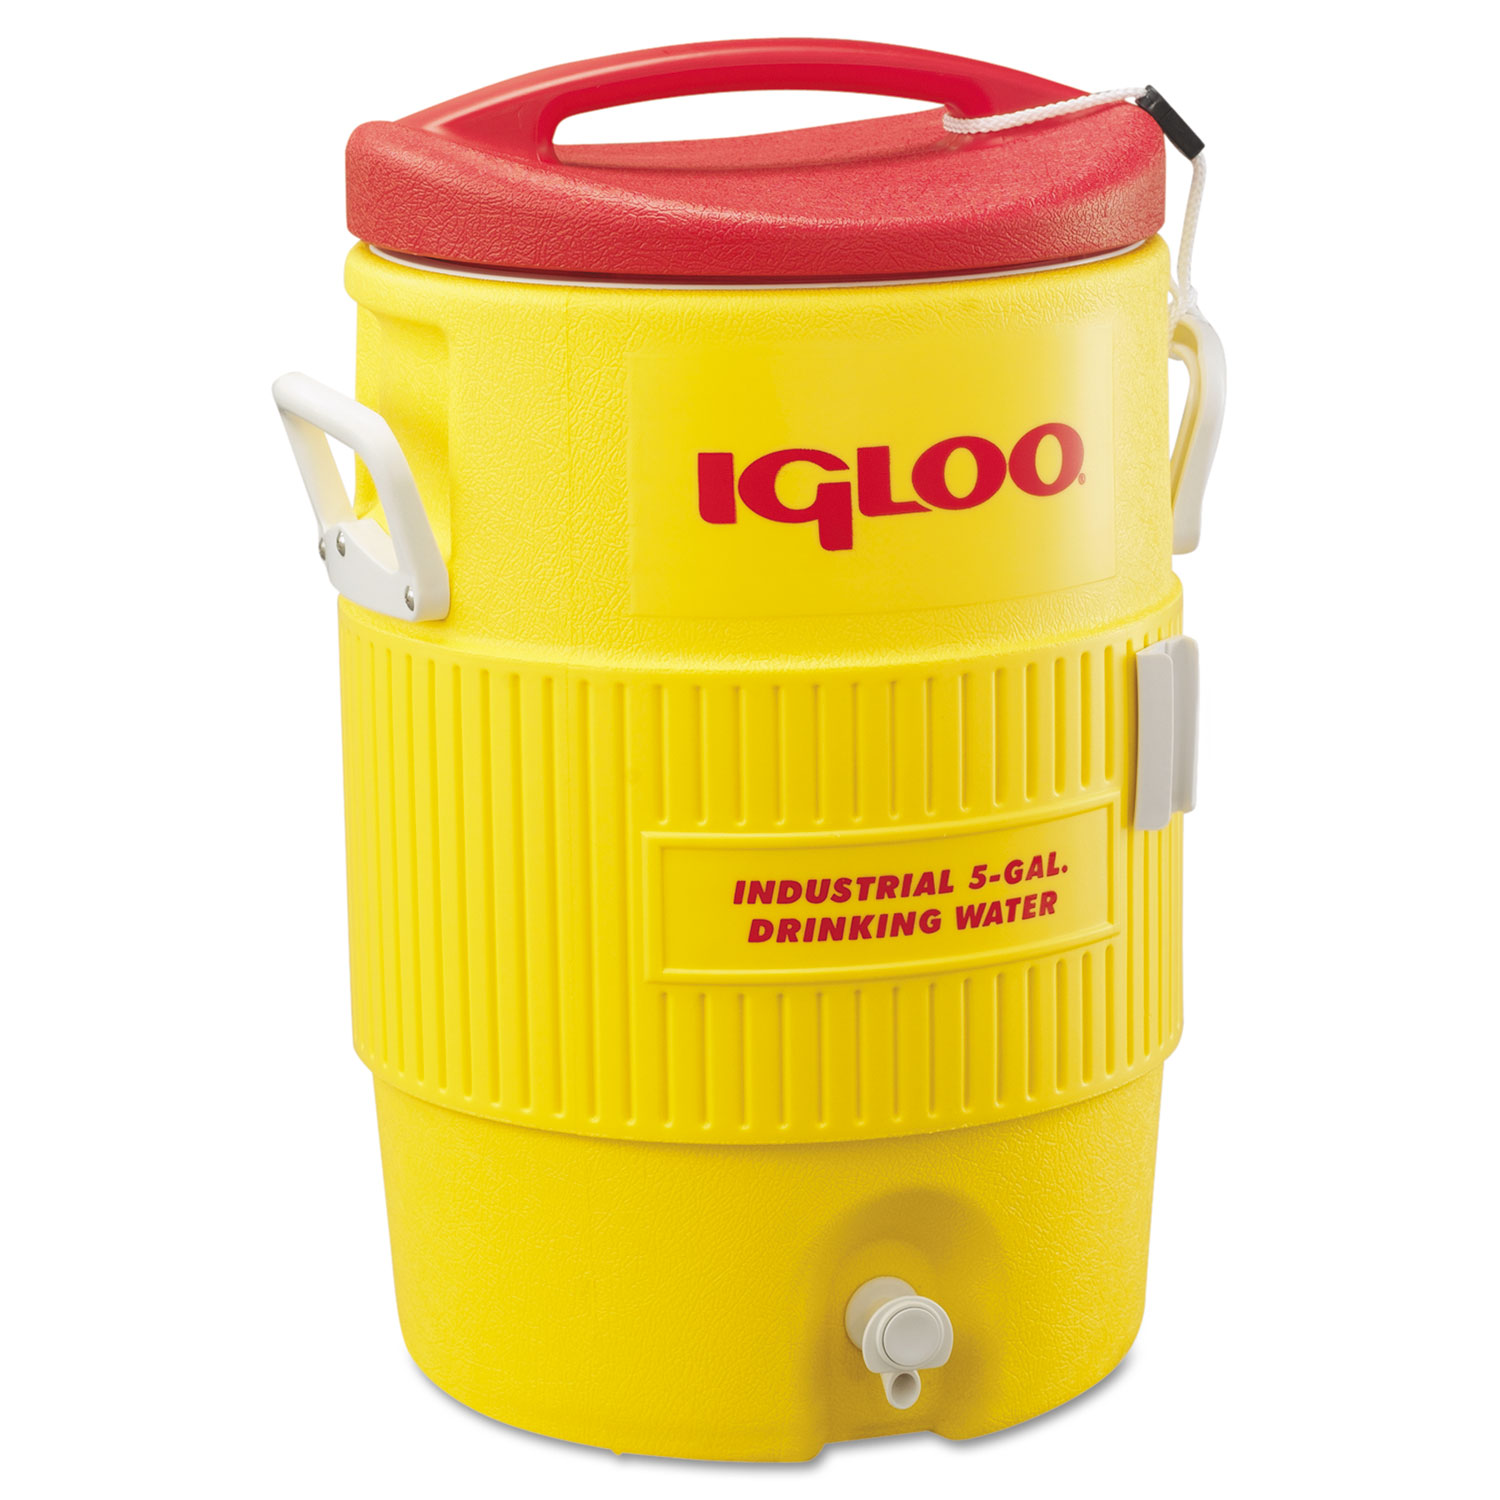 Industrial Water Cooler, 5 gal, Yellow/Red